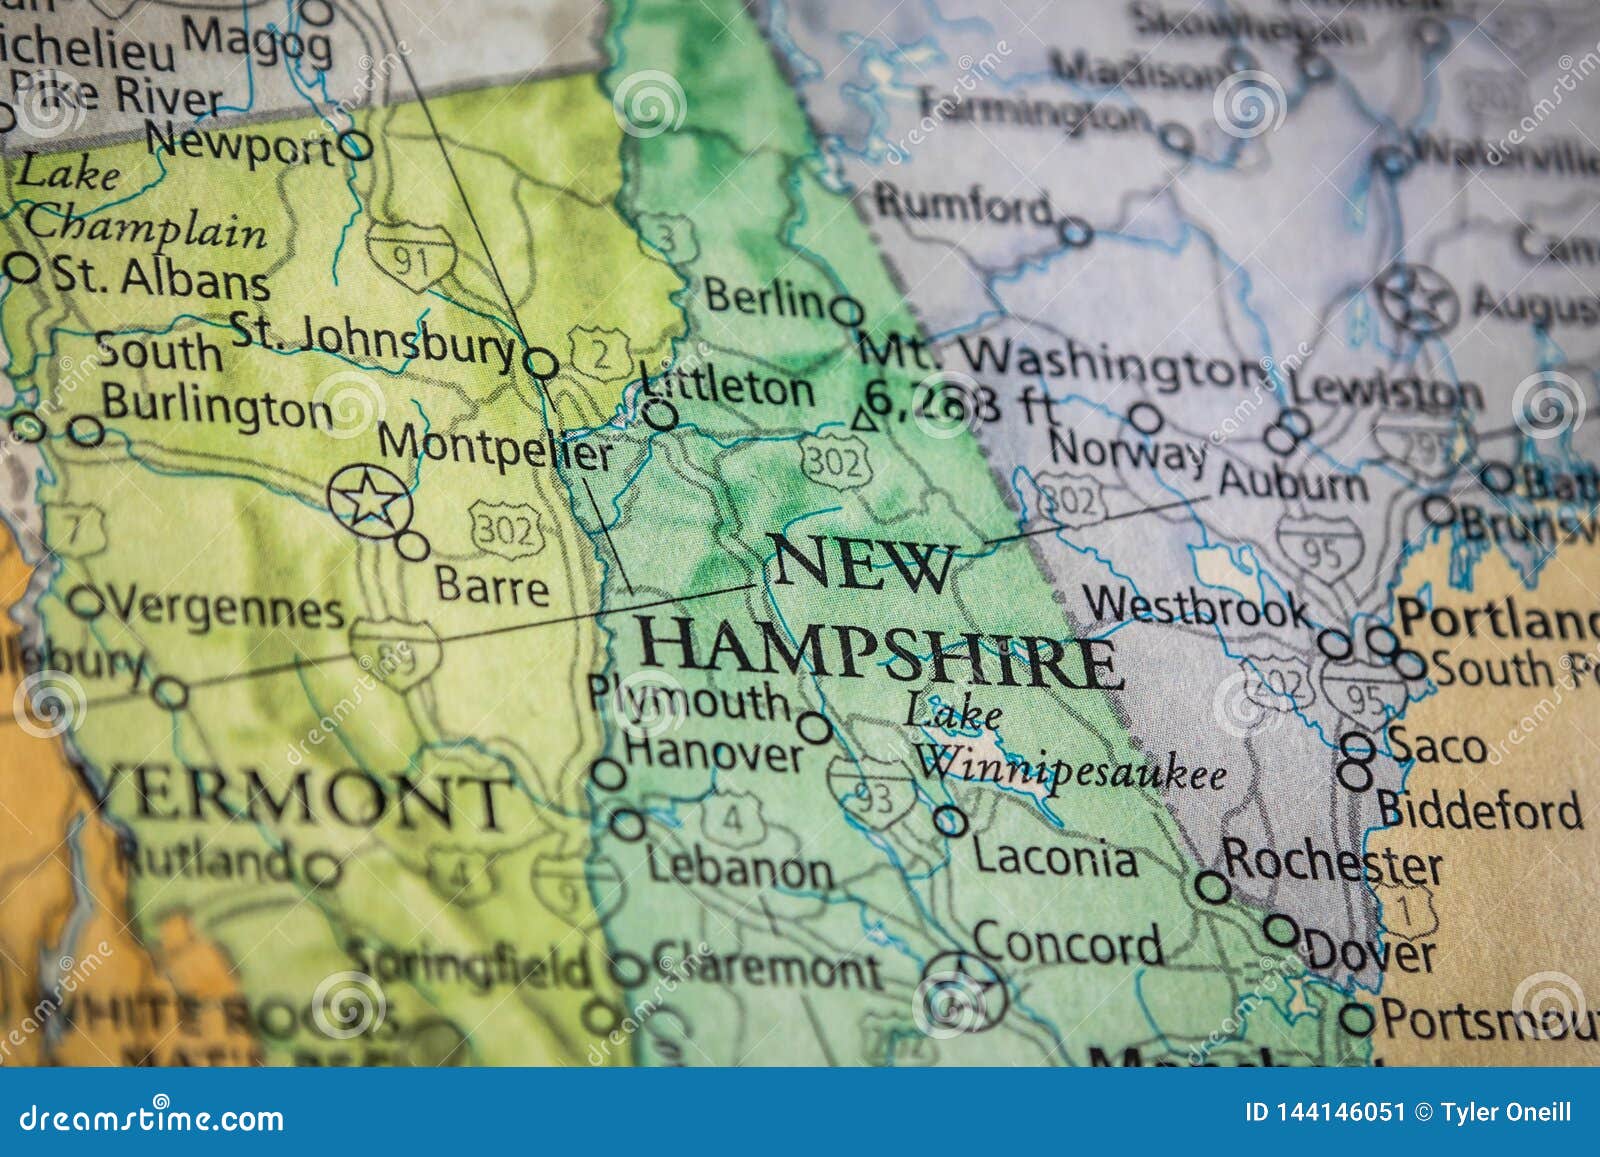 selective focus of new hampshire state on a geographical and political state map of the usa